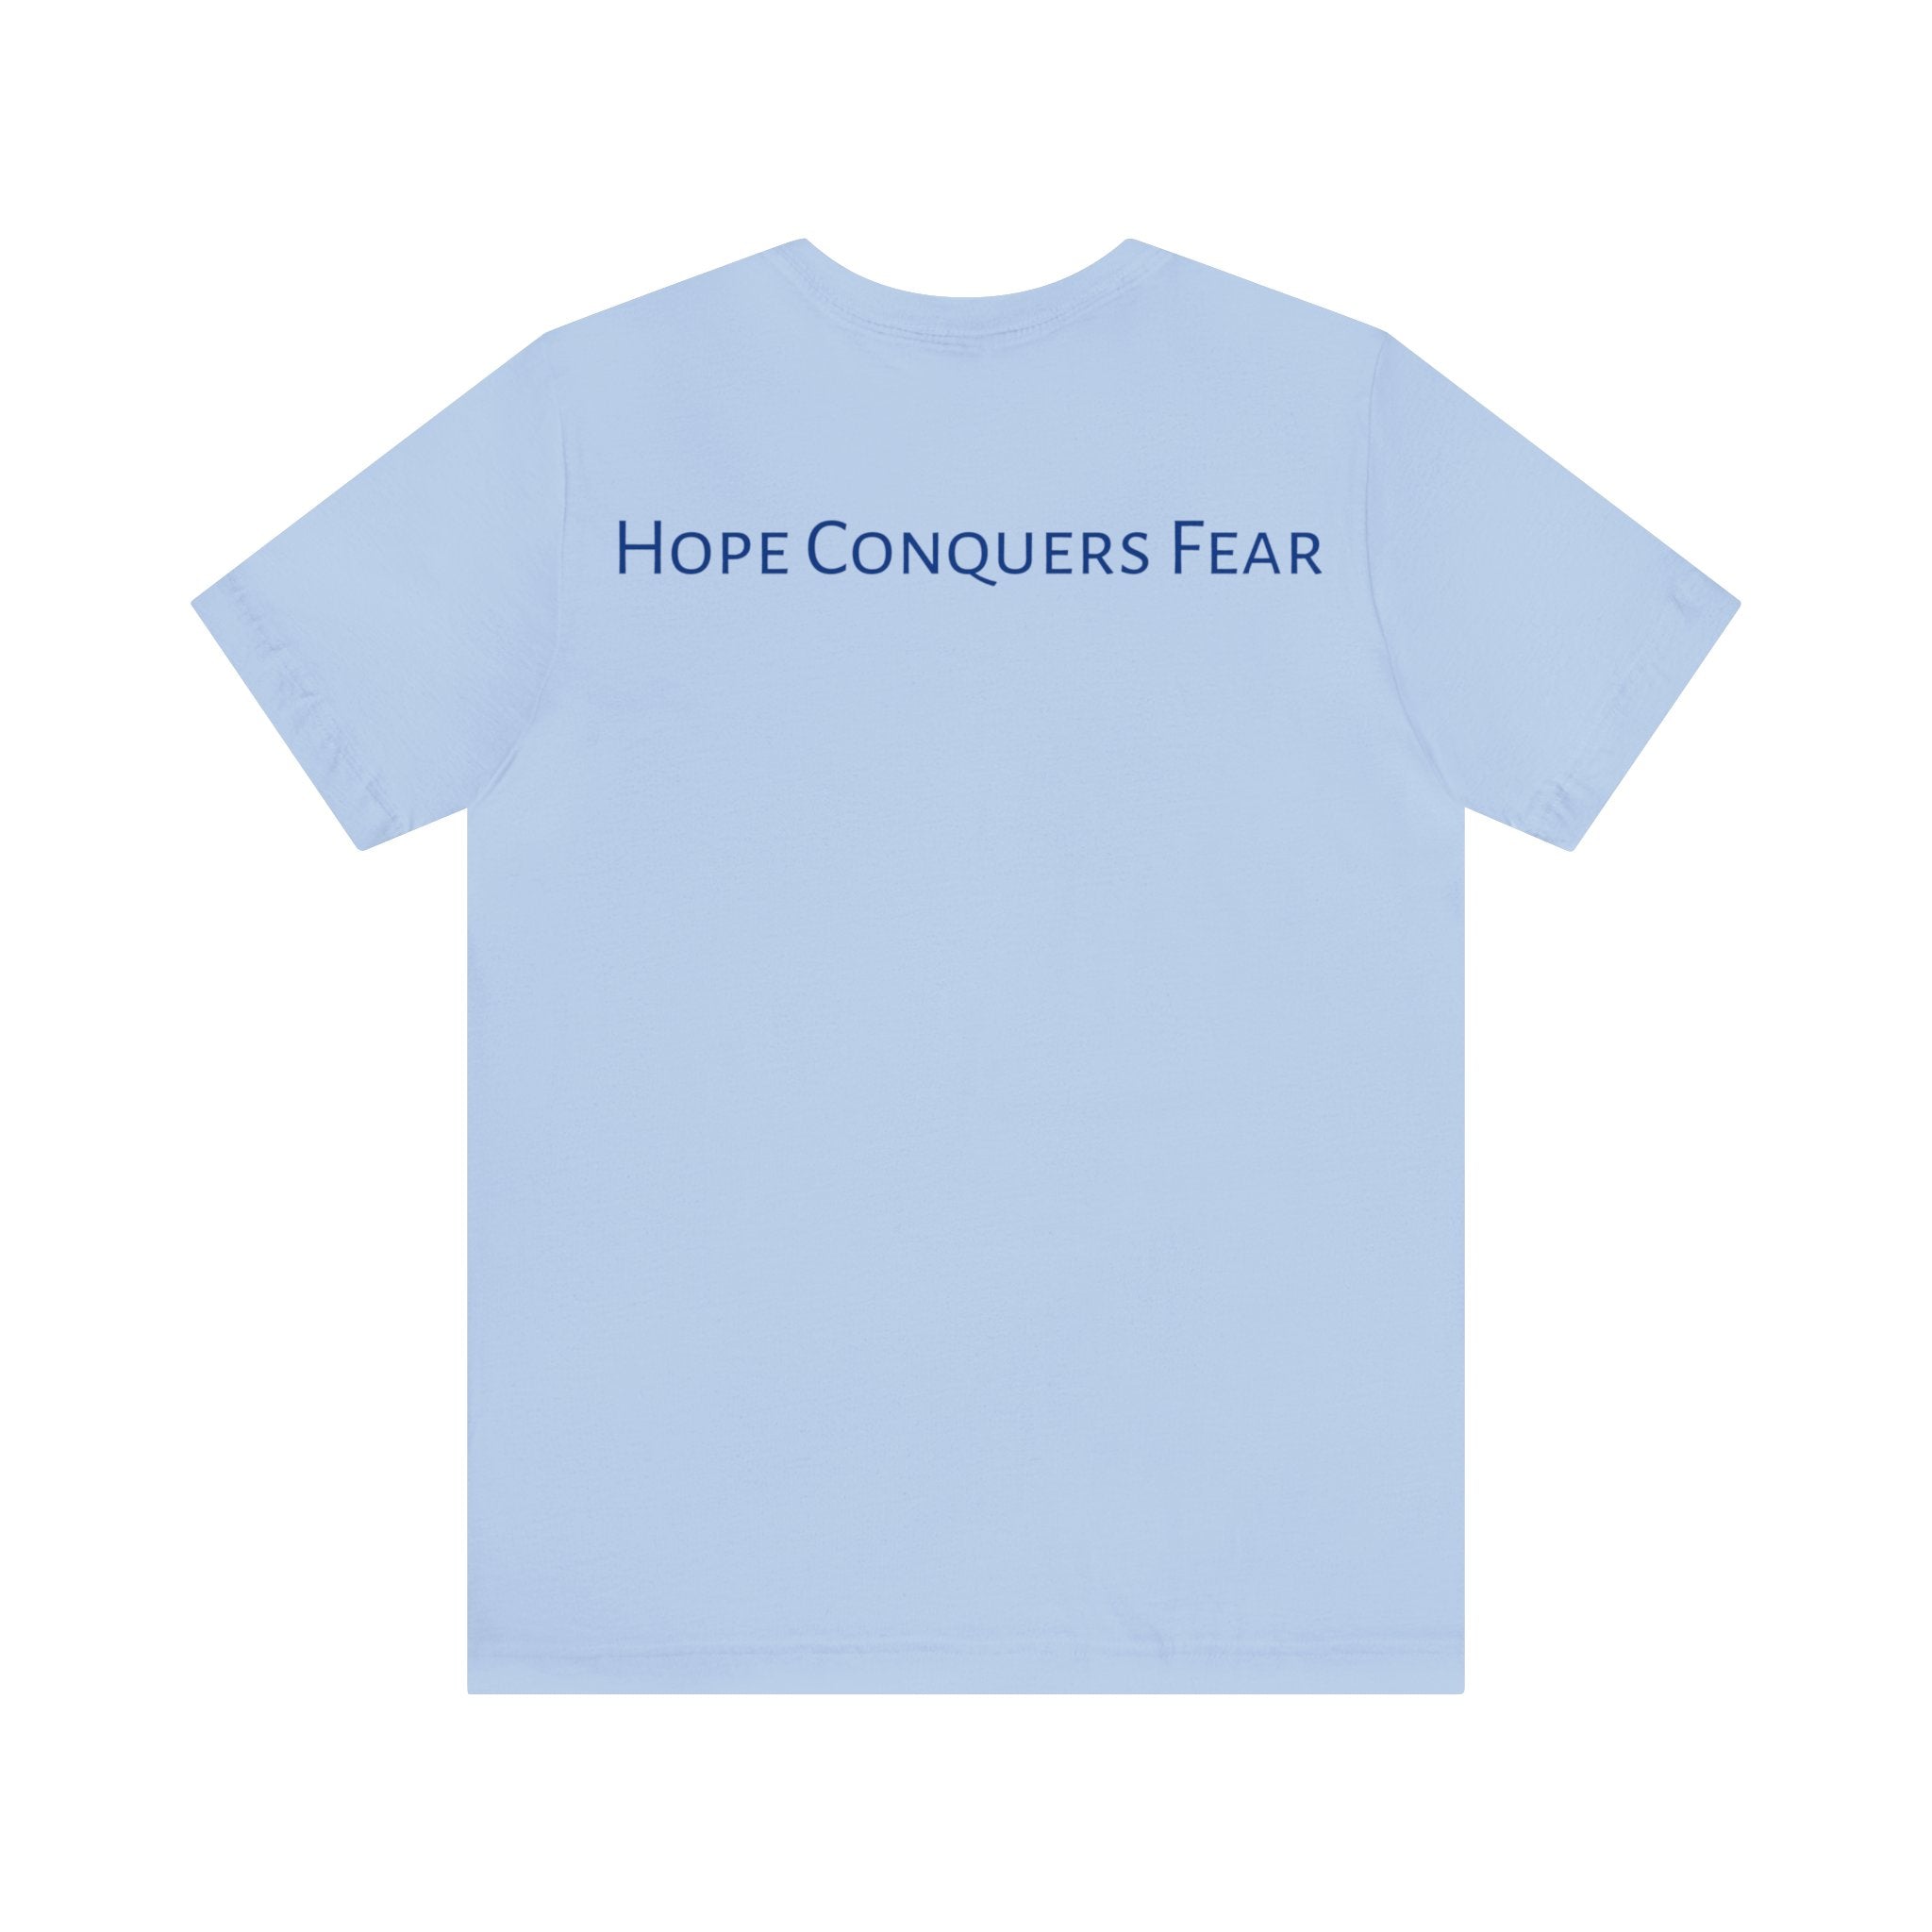 Hope Conquers Fear Jersey Tee - Bella+Canvas 3001 Heather Ice Blue Airlume Cotton Bella+Canvas 3001 Crew Neckline Jersey Short Sleeve Lightweight Fabric Mental Health Support Retail Fit Tear-away Label Tee Unisex Tee T-Shirt 18017075768456301798_2048 Printify